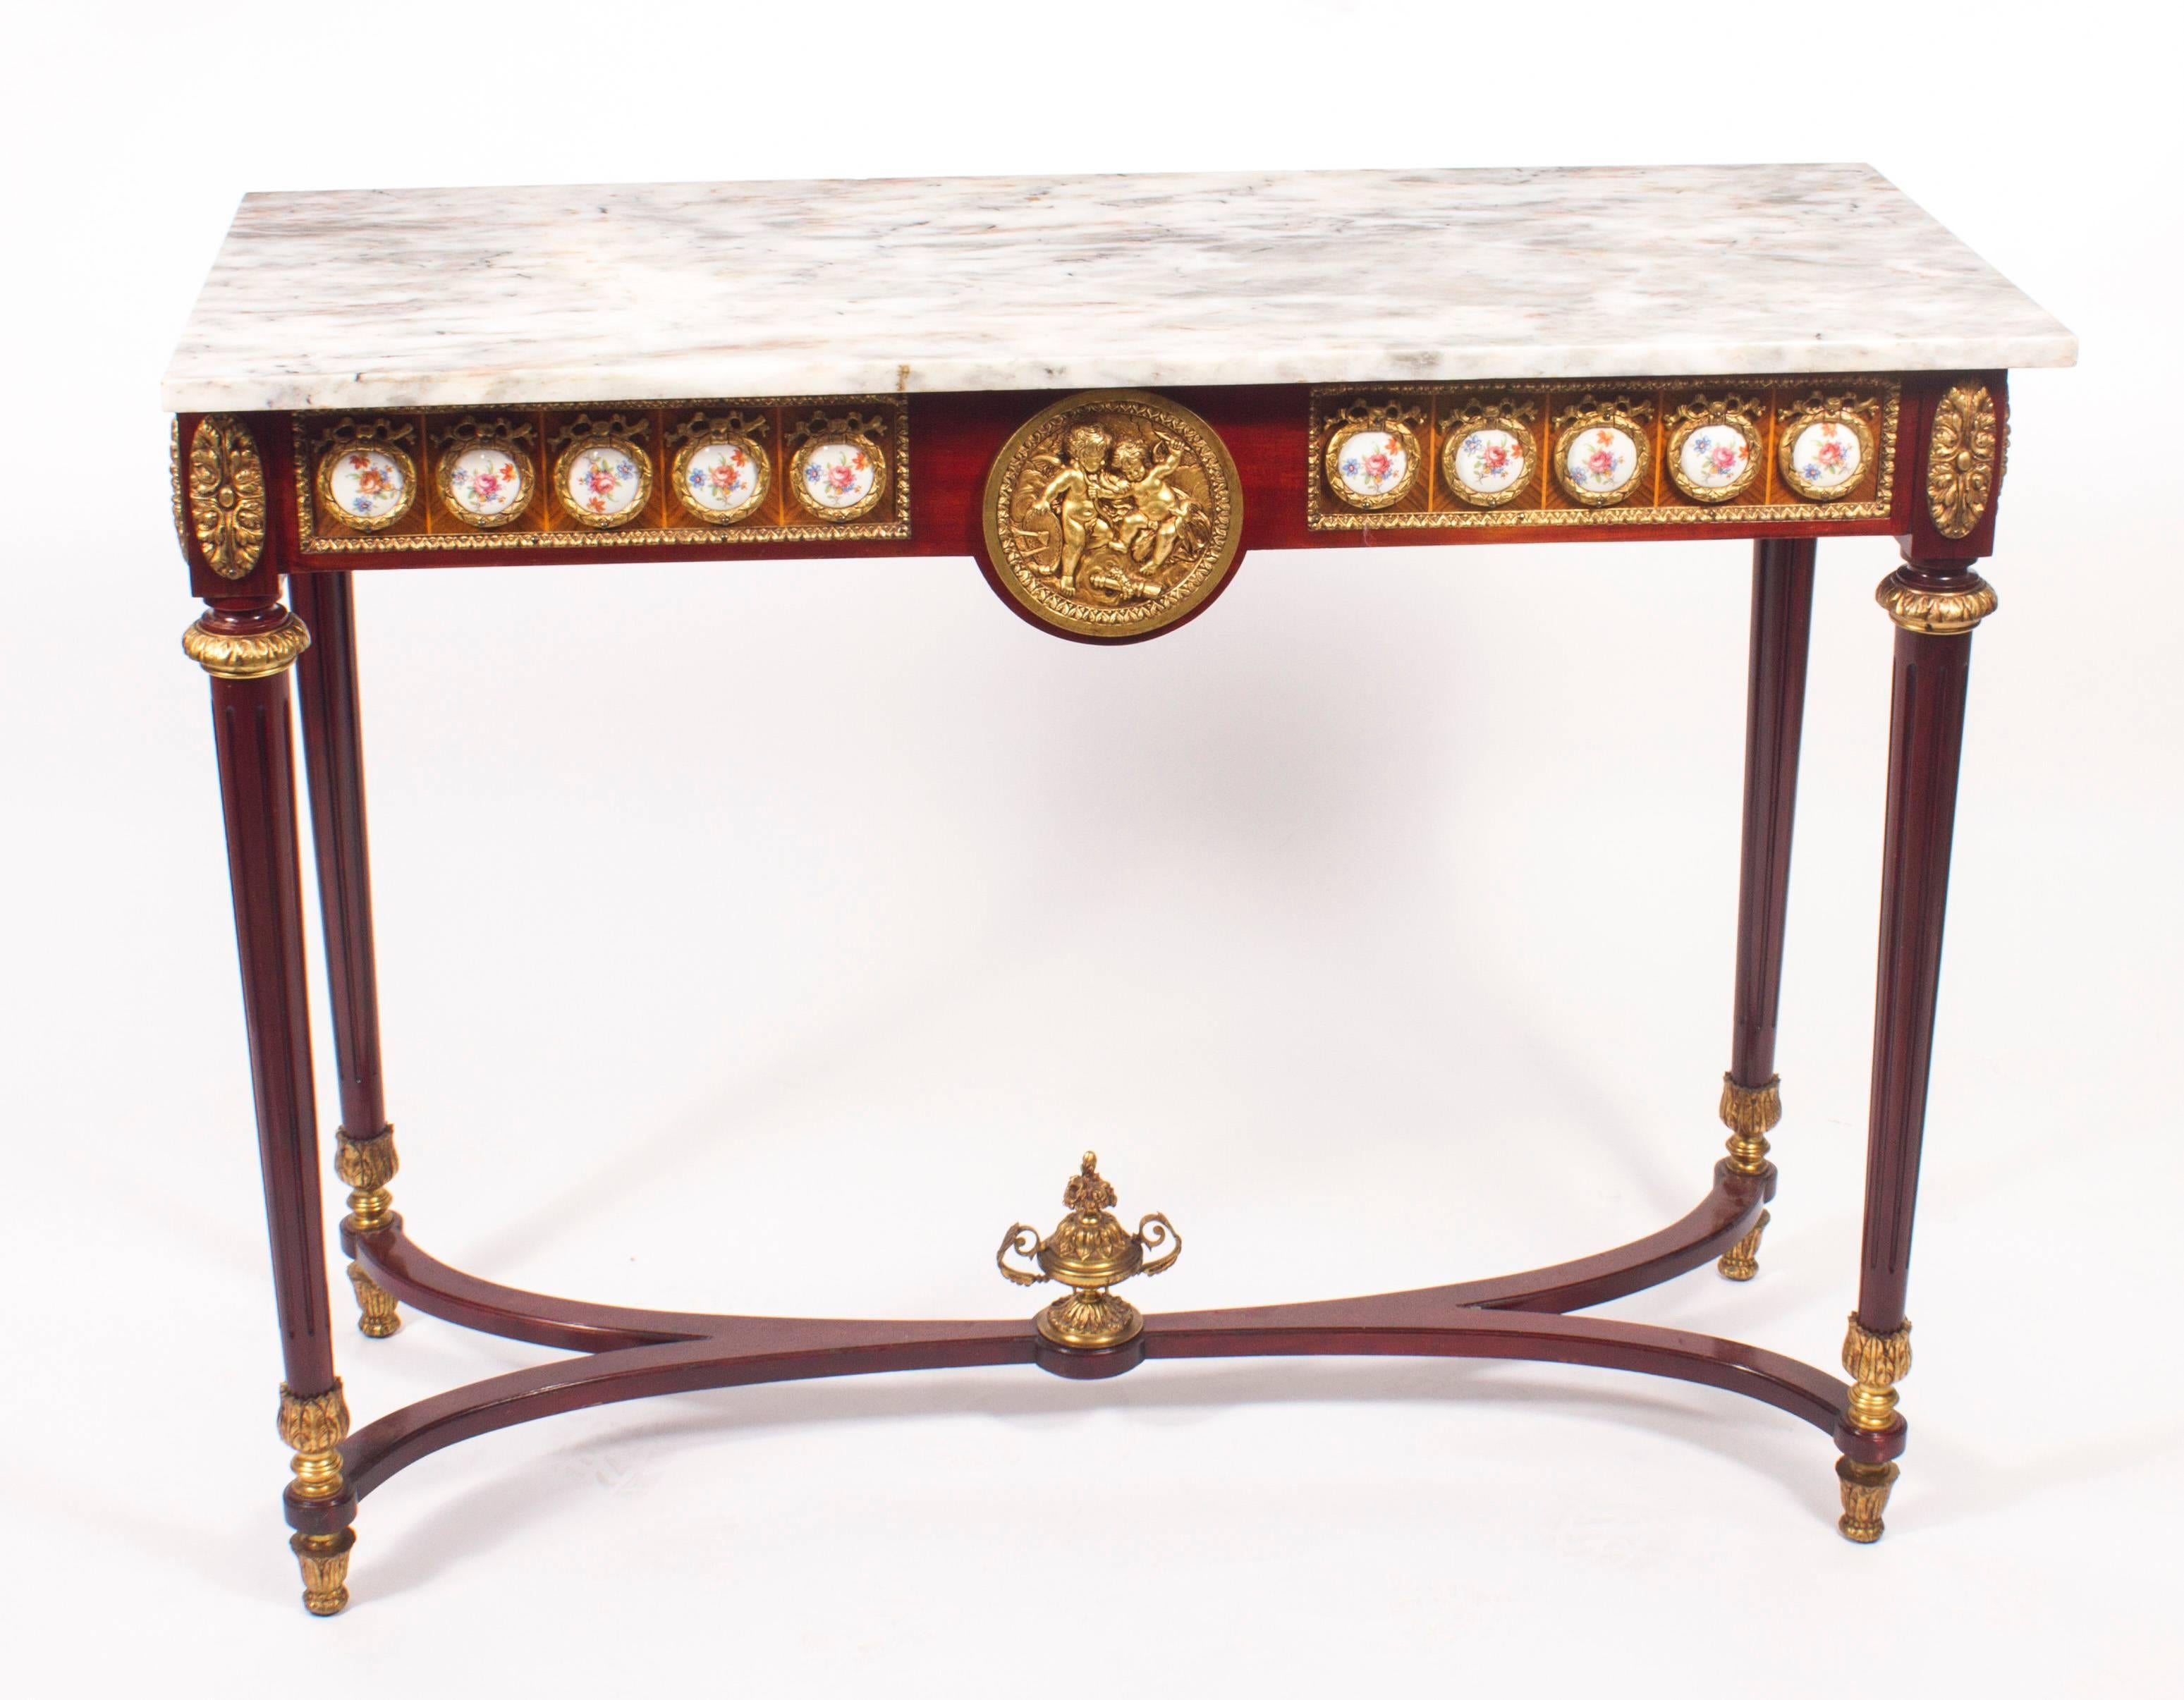 This is an elegant French Louis Revival console table dating from the 1970s.

This magnificent piece is crafted from mahogany and features eighteen floral painted Sèvres style oval porcelain plaques and superb ormolu mounts with a central circular